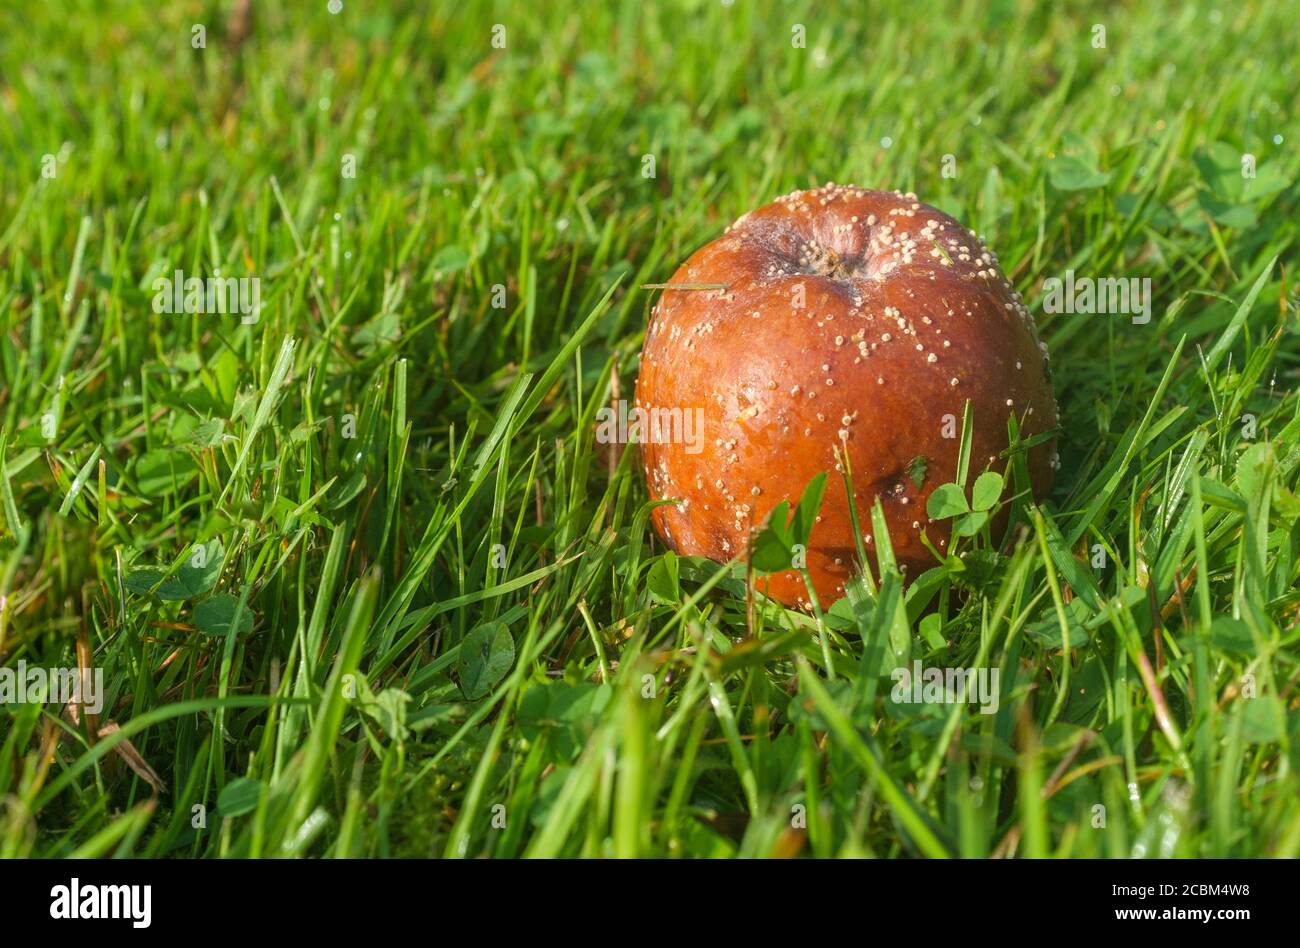 Brown rotten apple laying on green grass on the ground at Autumn Stock Photo